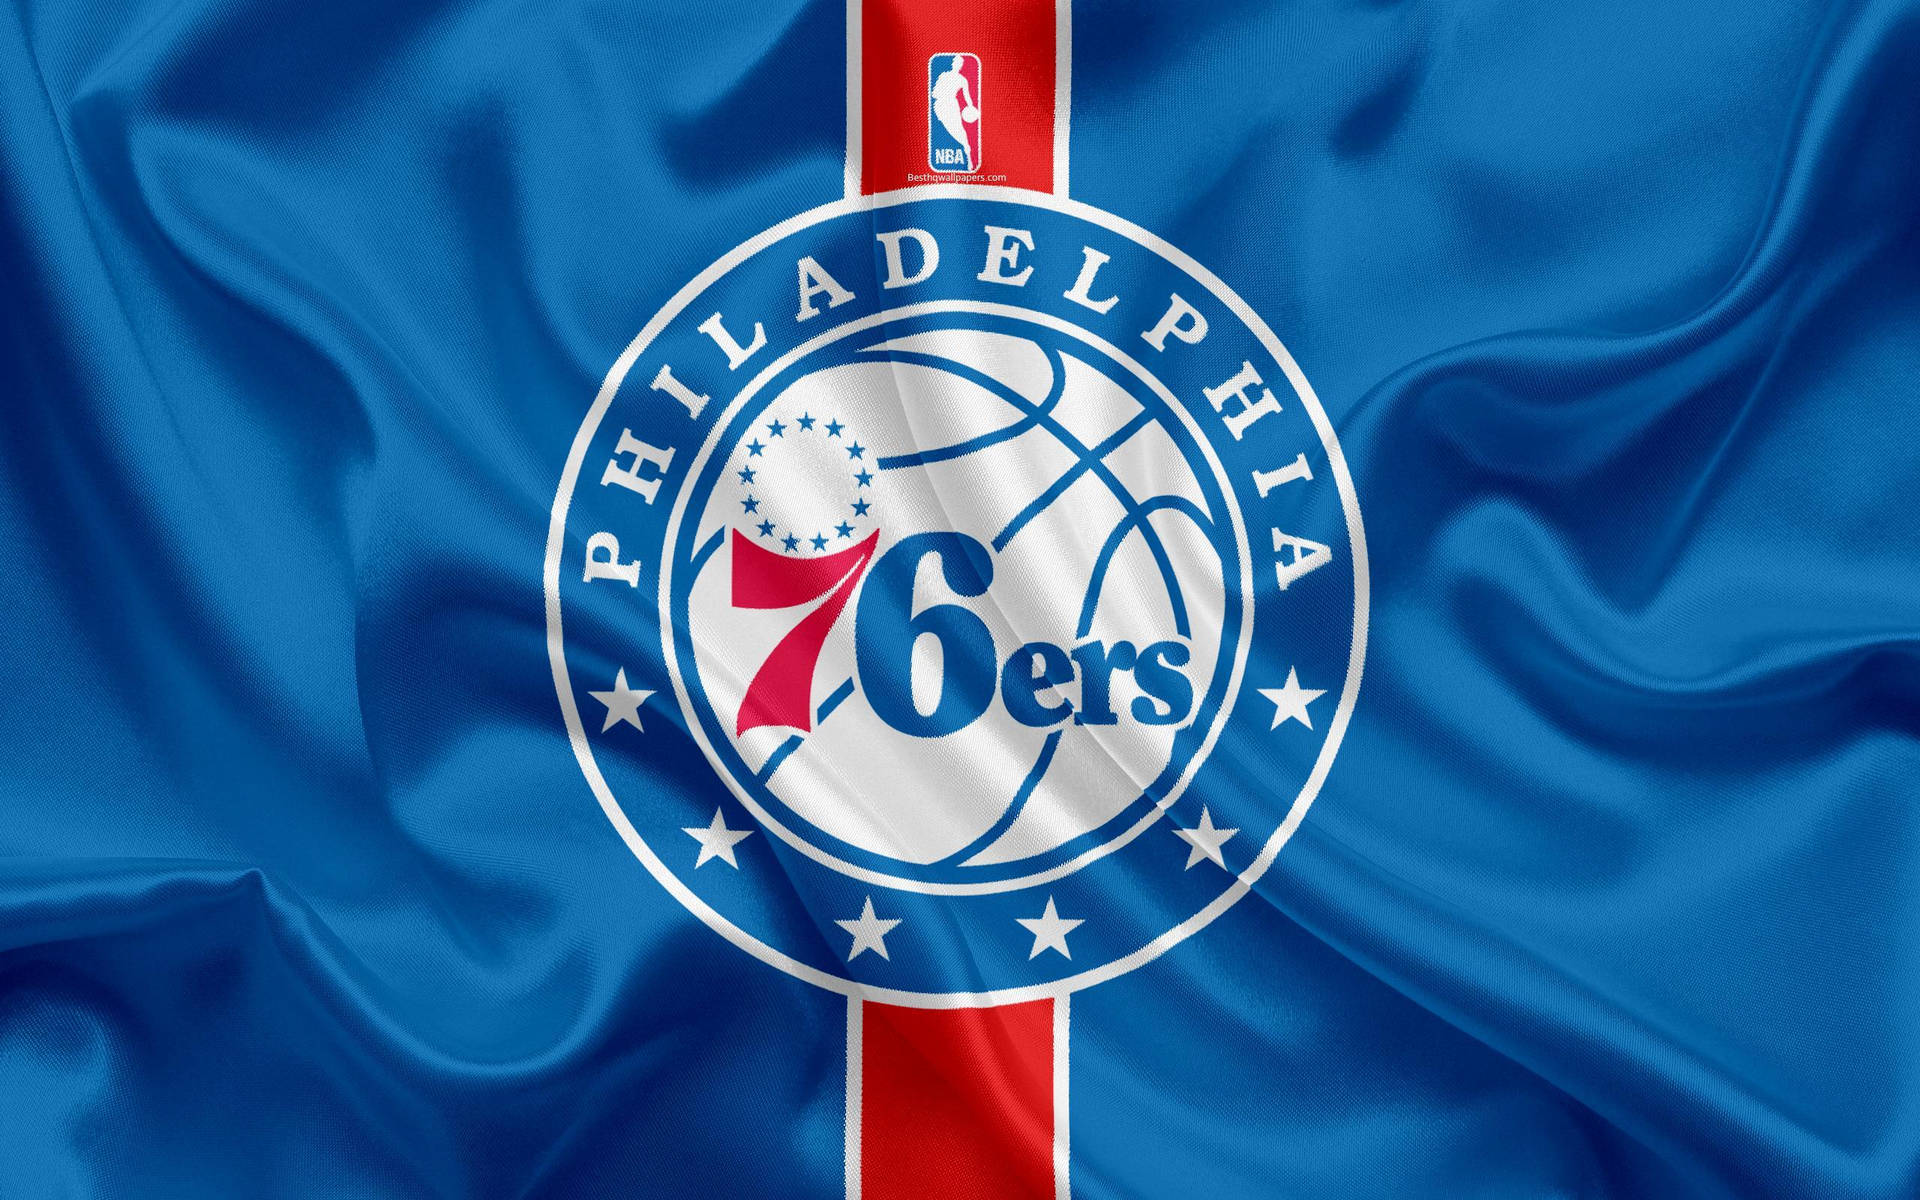 Sixers Background Wallpaper